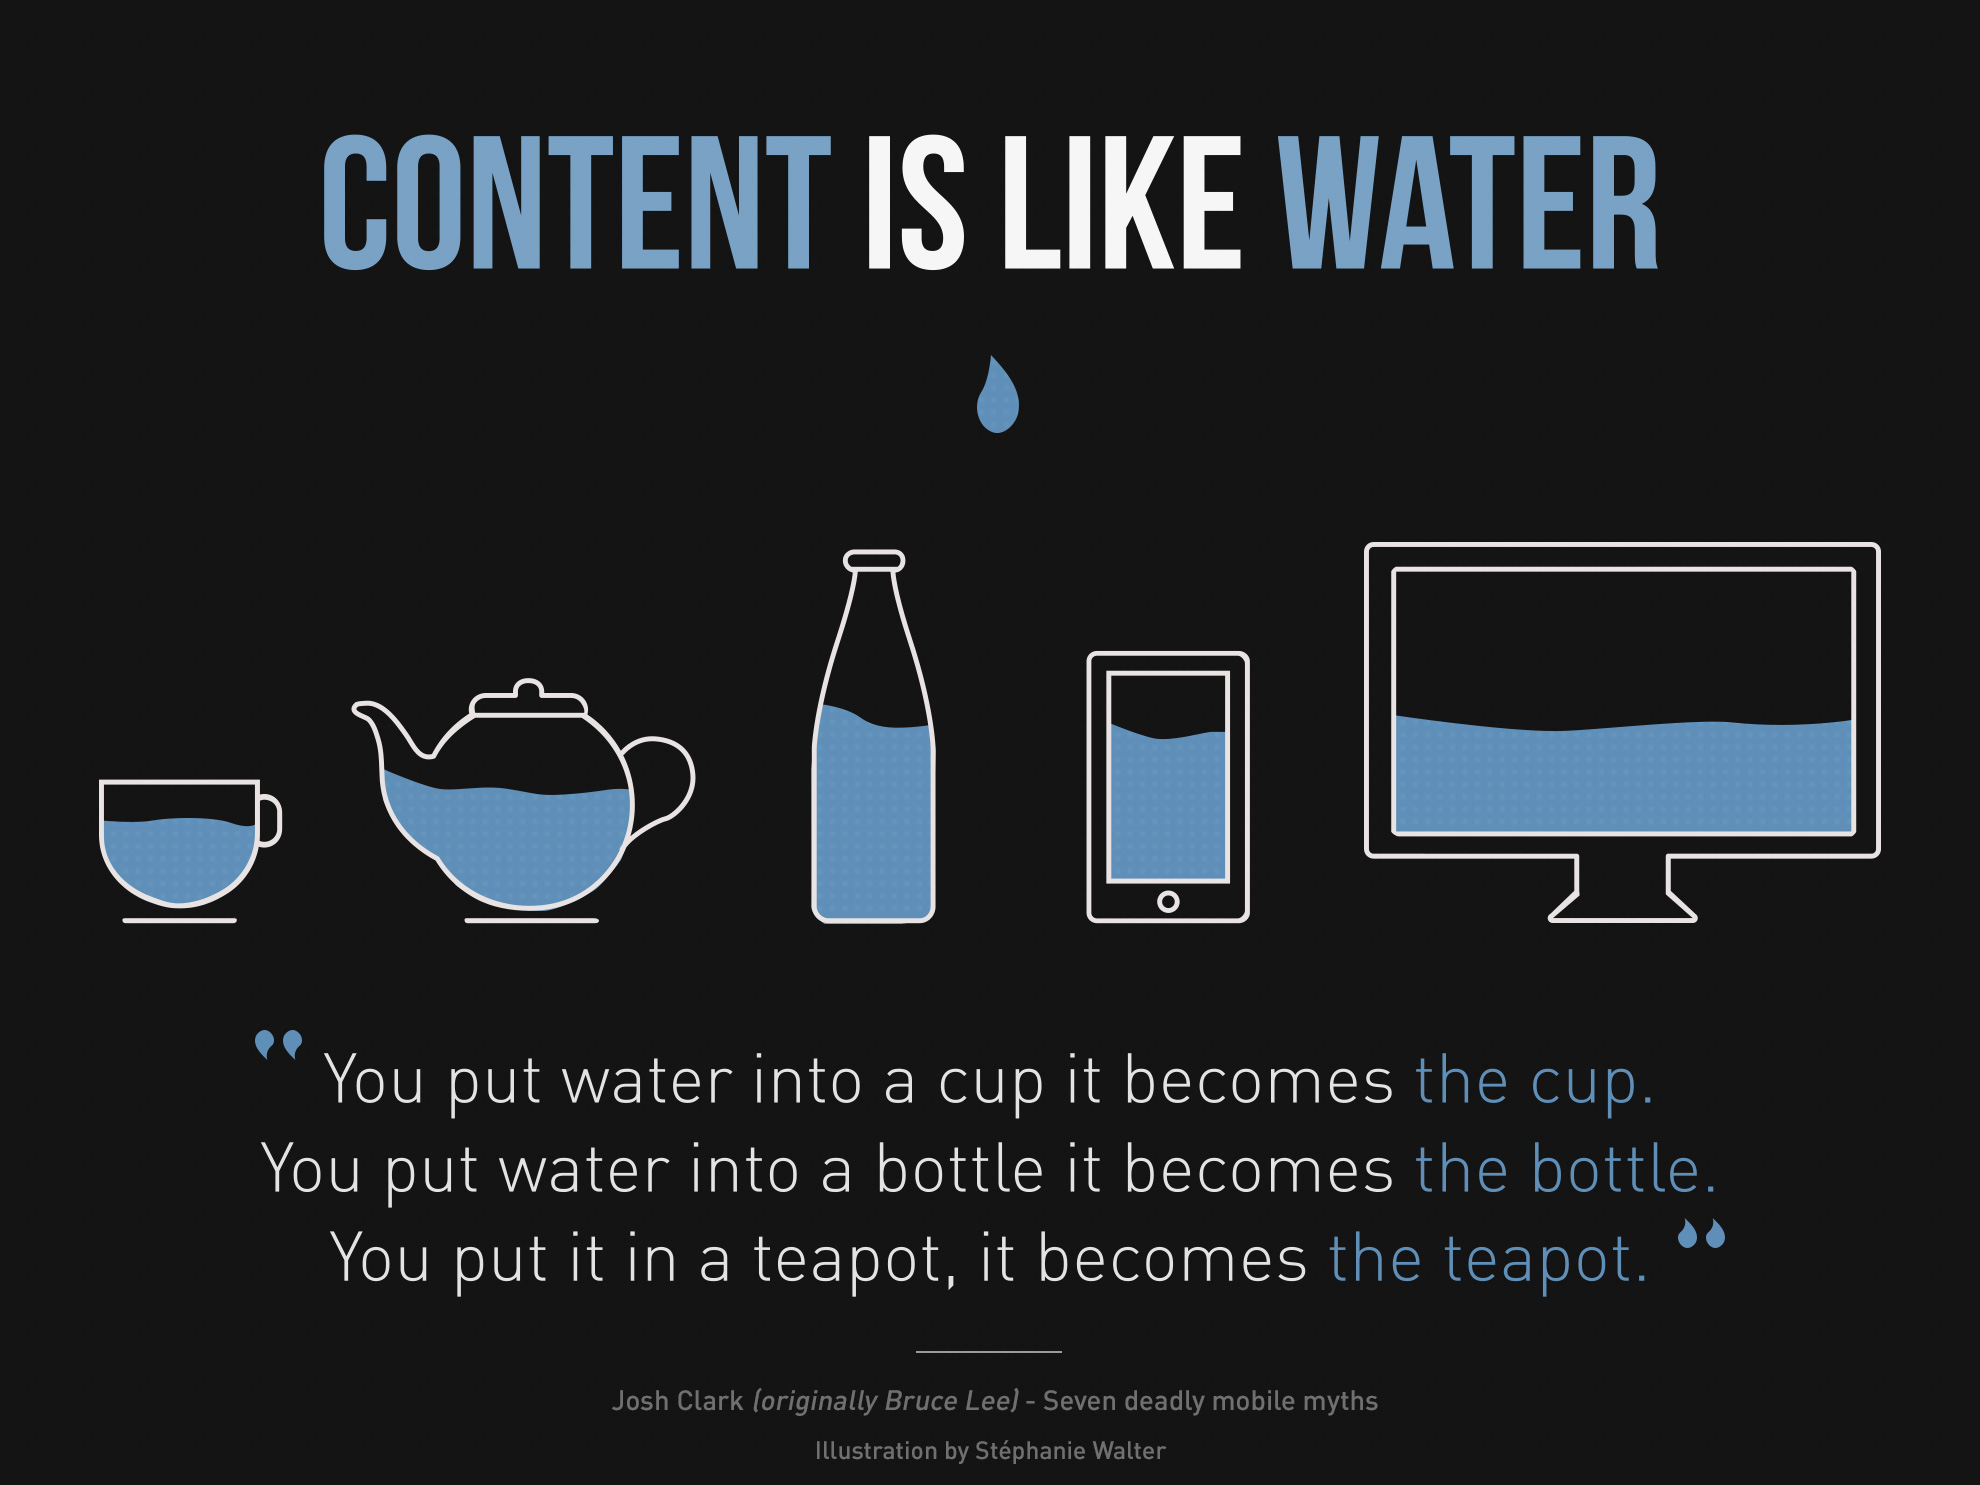 responsive-Content-is-like-water-1980